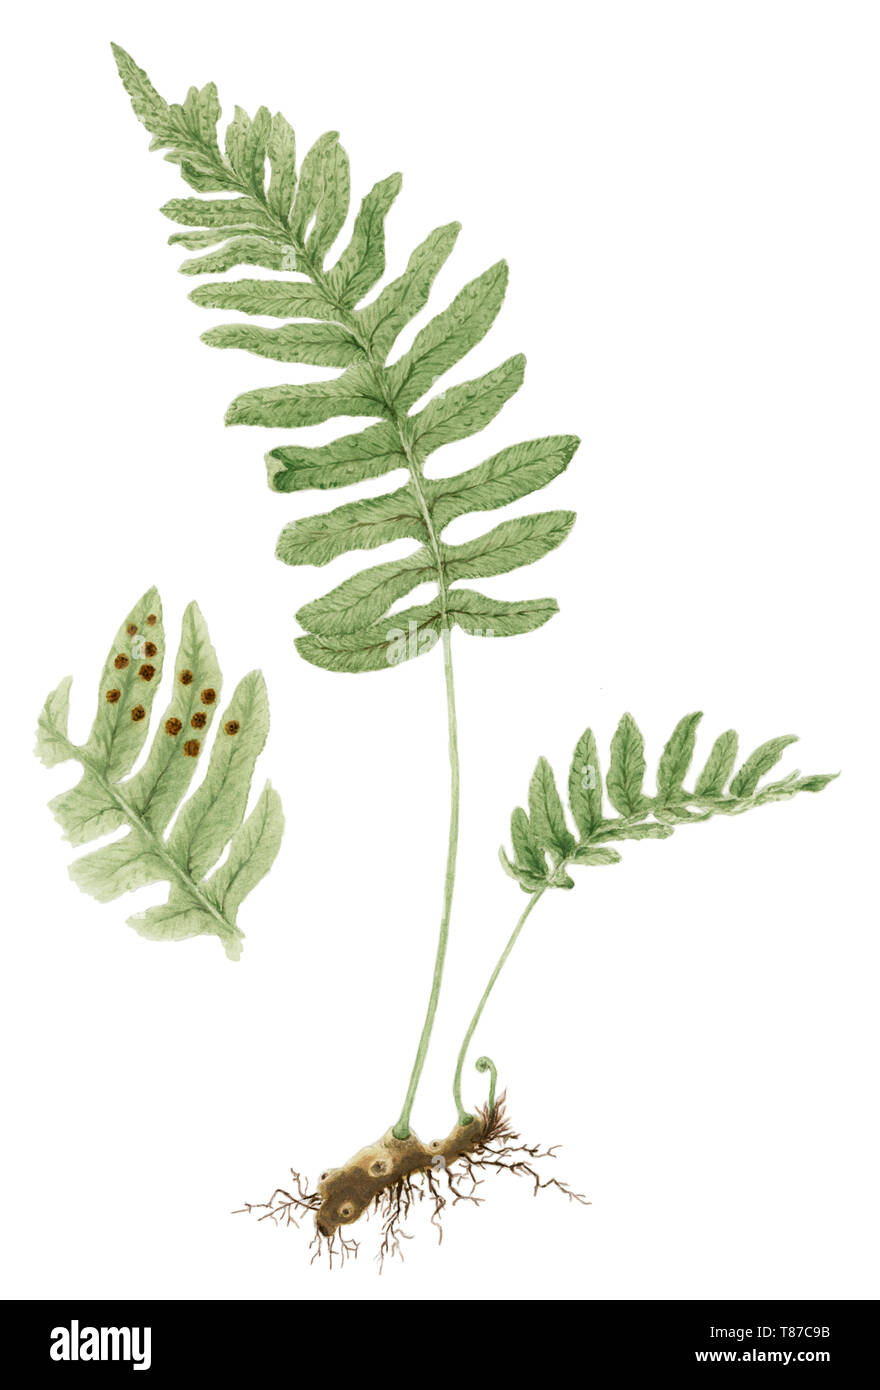 Common polypody (Polypodium vulgare) botanical drawing over white background. Pencil and watercolor on paper. Stock Photo